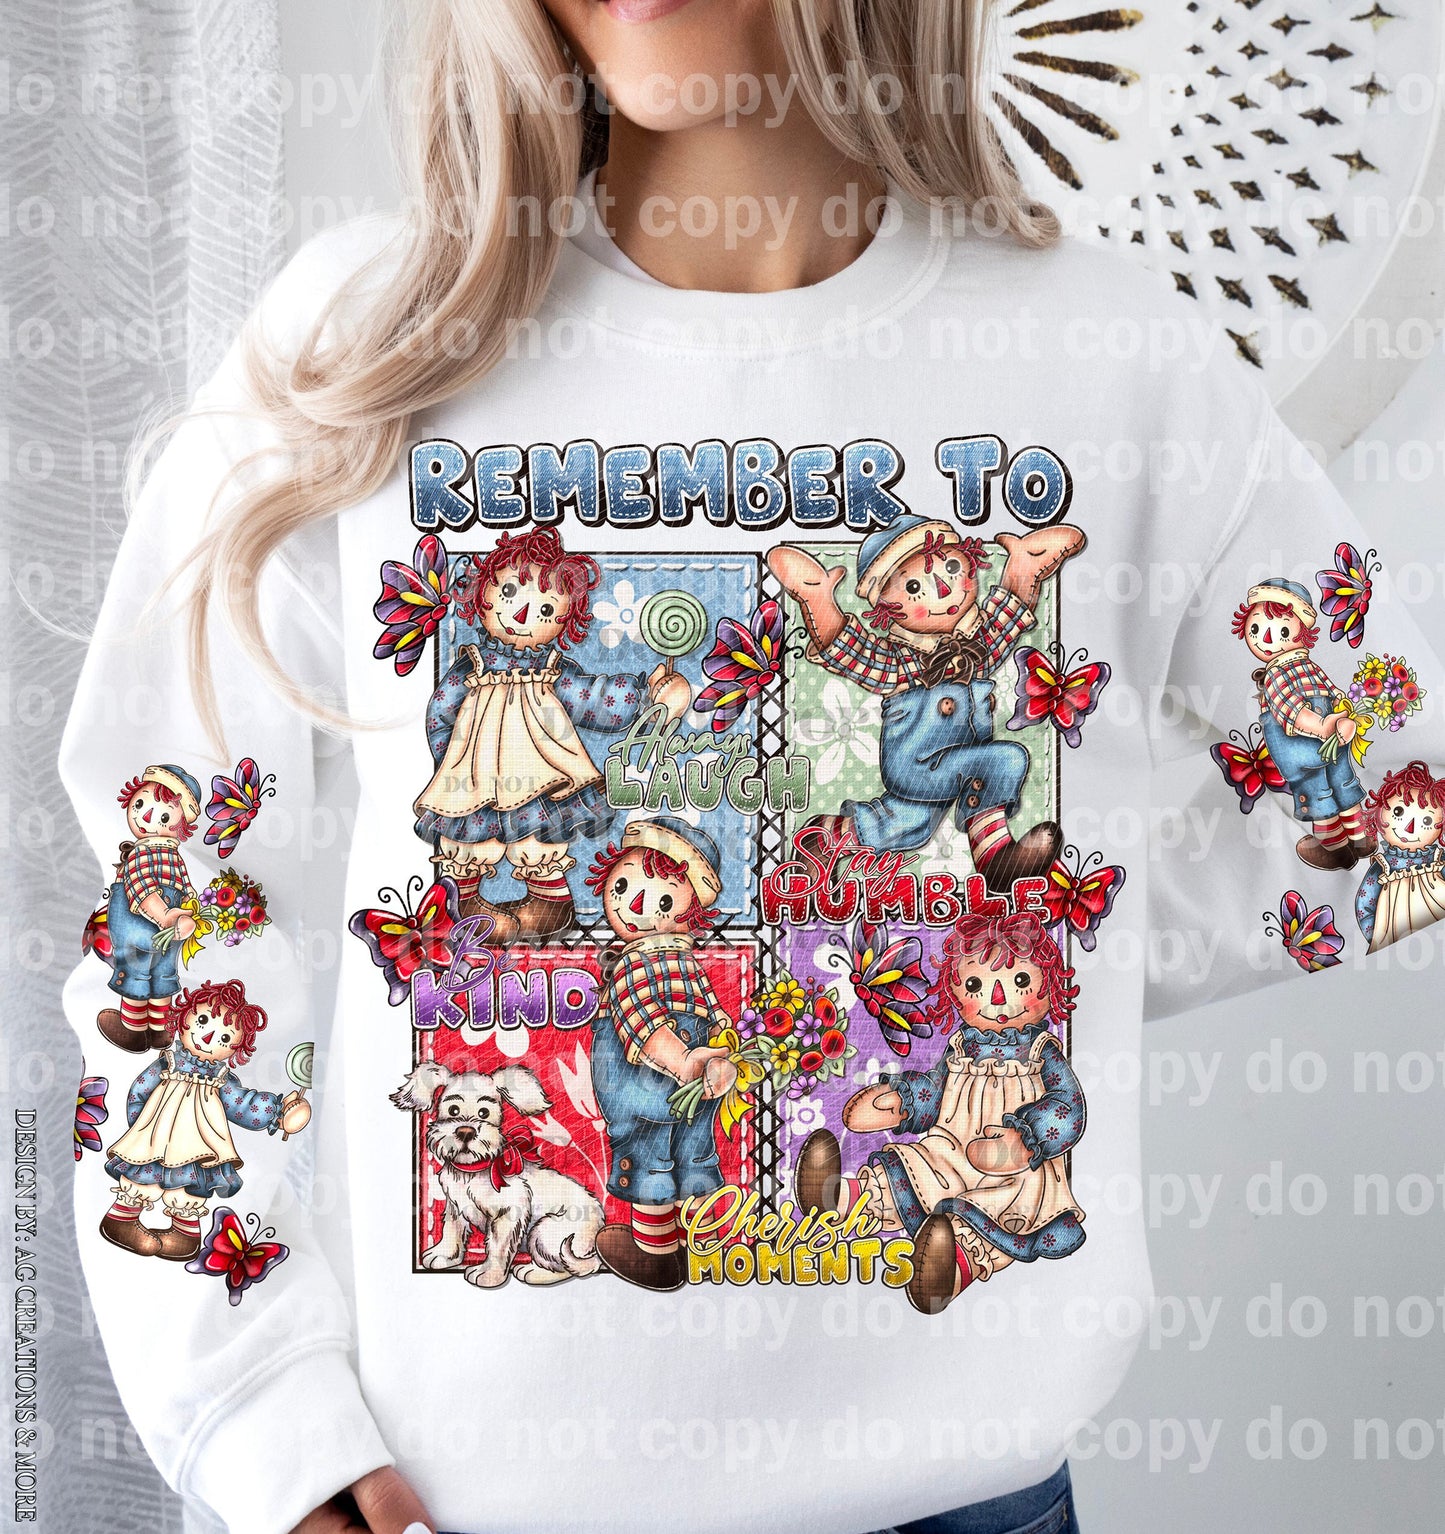 Raggedy Remember To Always Laugh with Optional Two Rows Sleeve Designs Dream Print or Sublimation Print